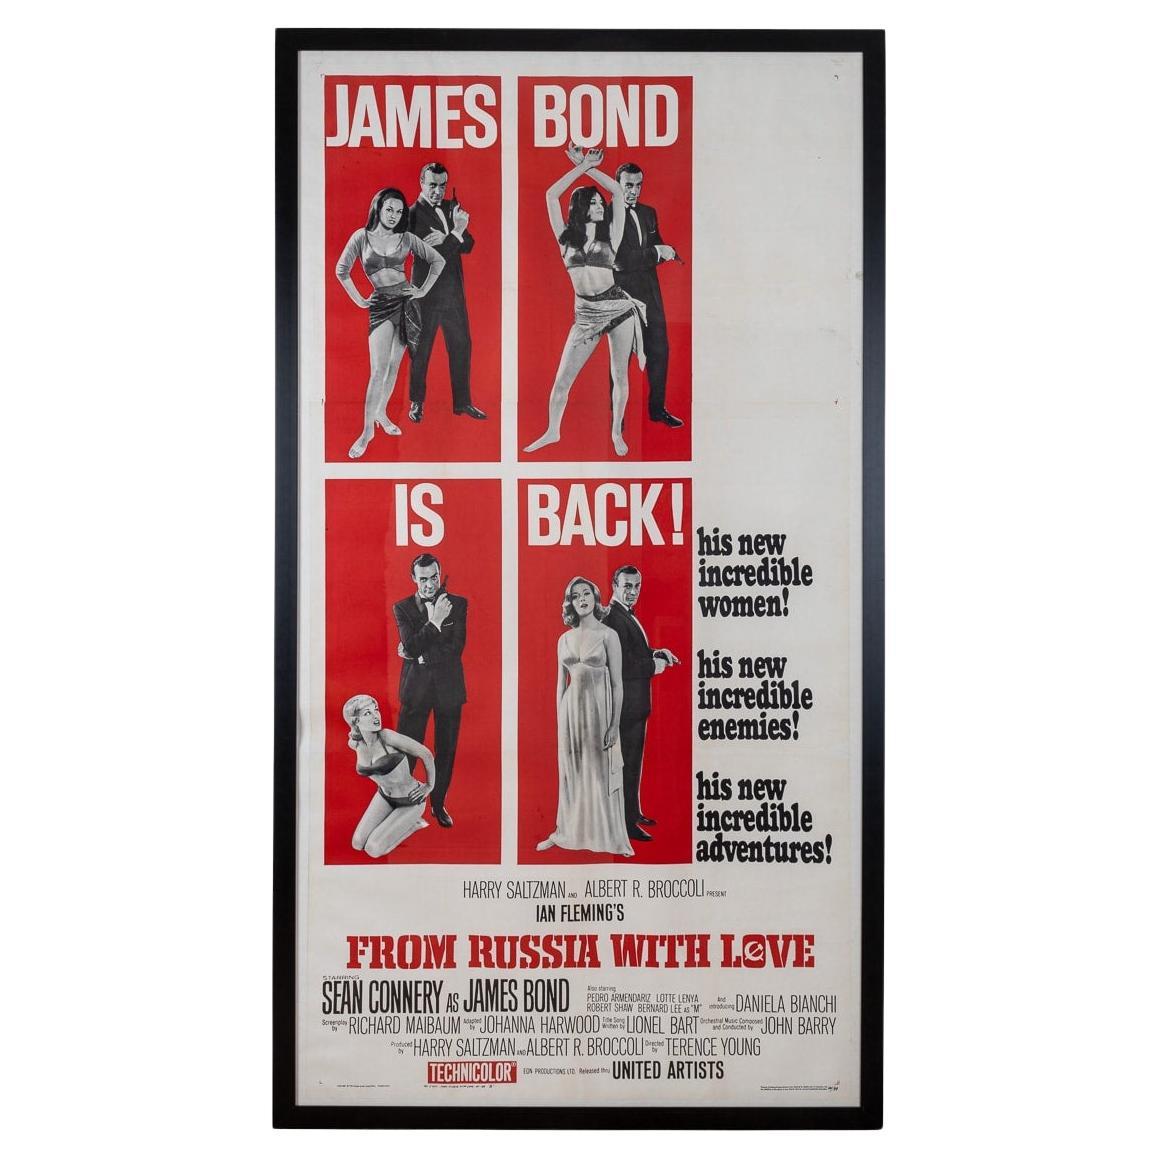 Original American (U.S) Release James Bond 'From Russia With Love' Poster c.1963 For Sale